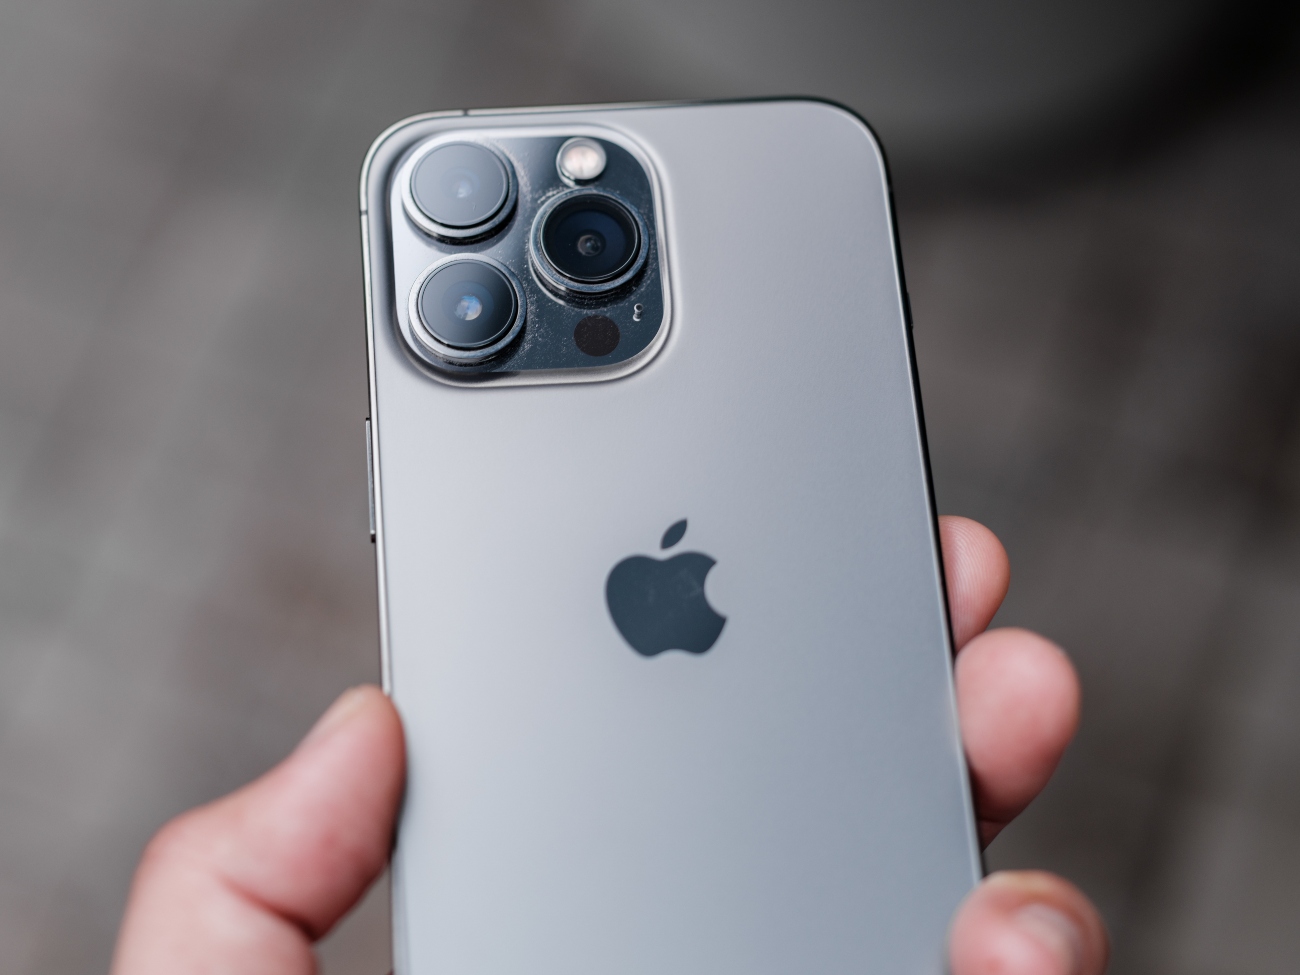 A close up of a space grey iPhone 13 Pro Max in someone's hand